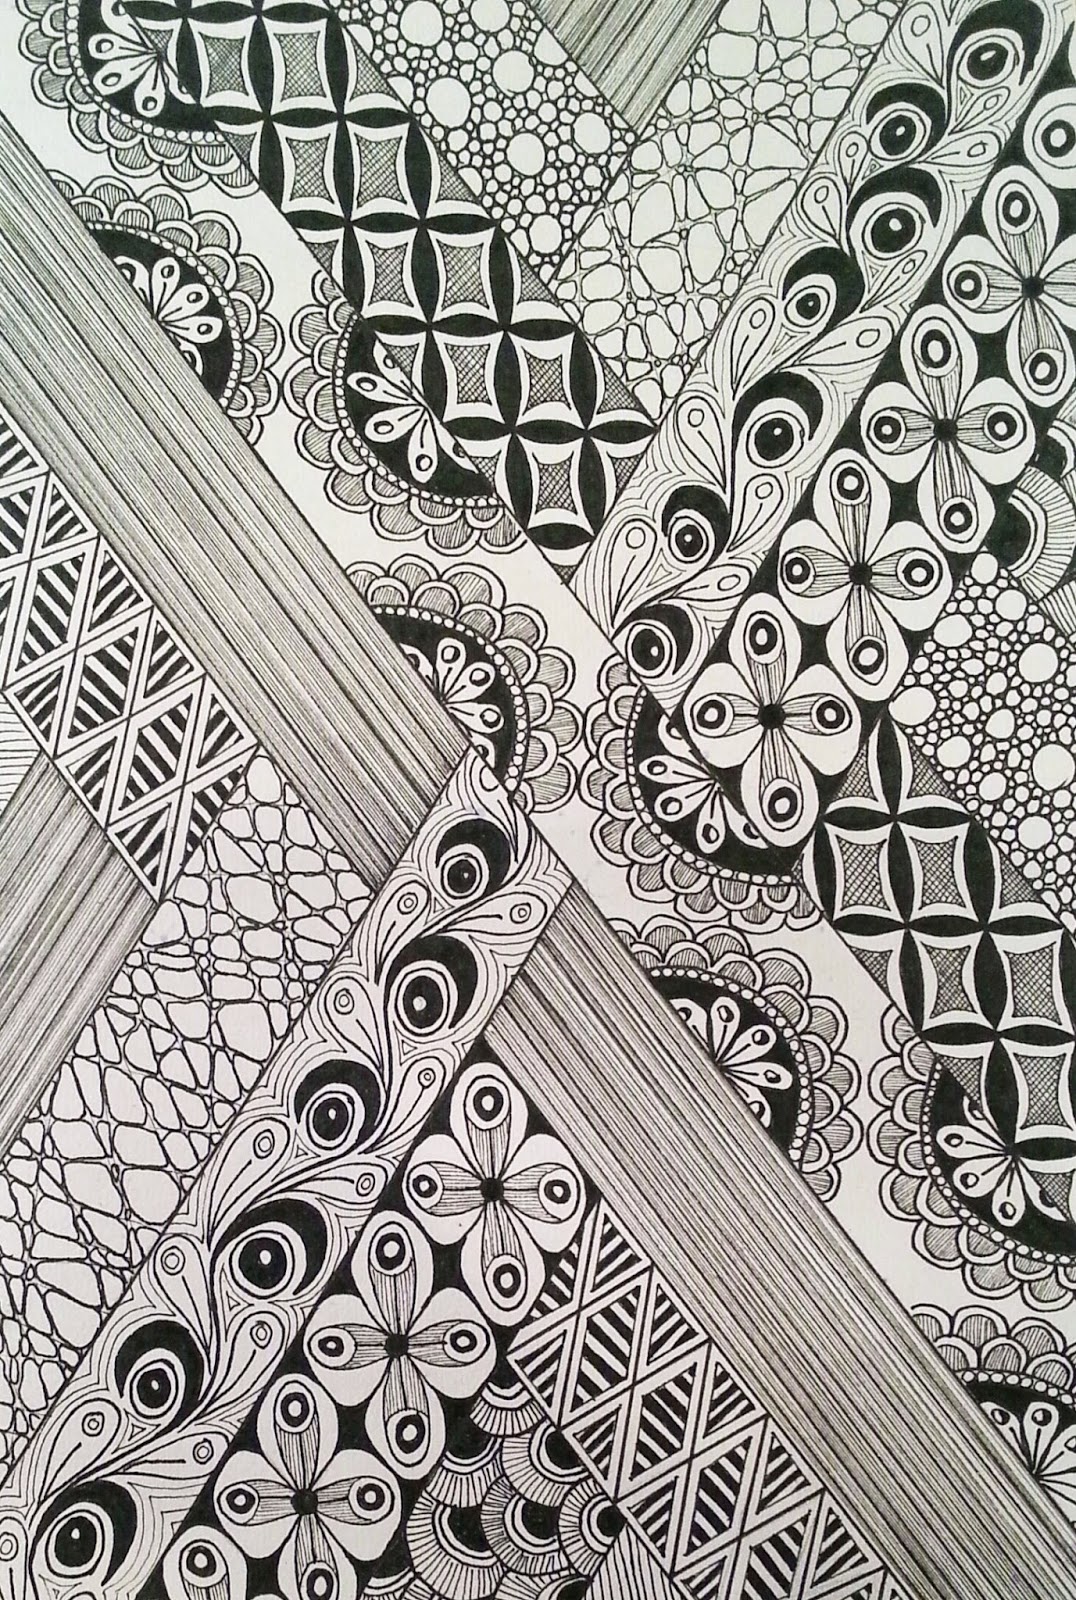 Judy's Zentangle Creations: Pebbles step by step